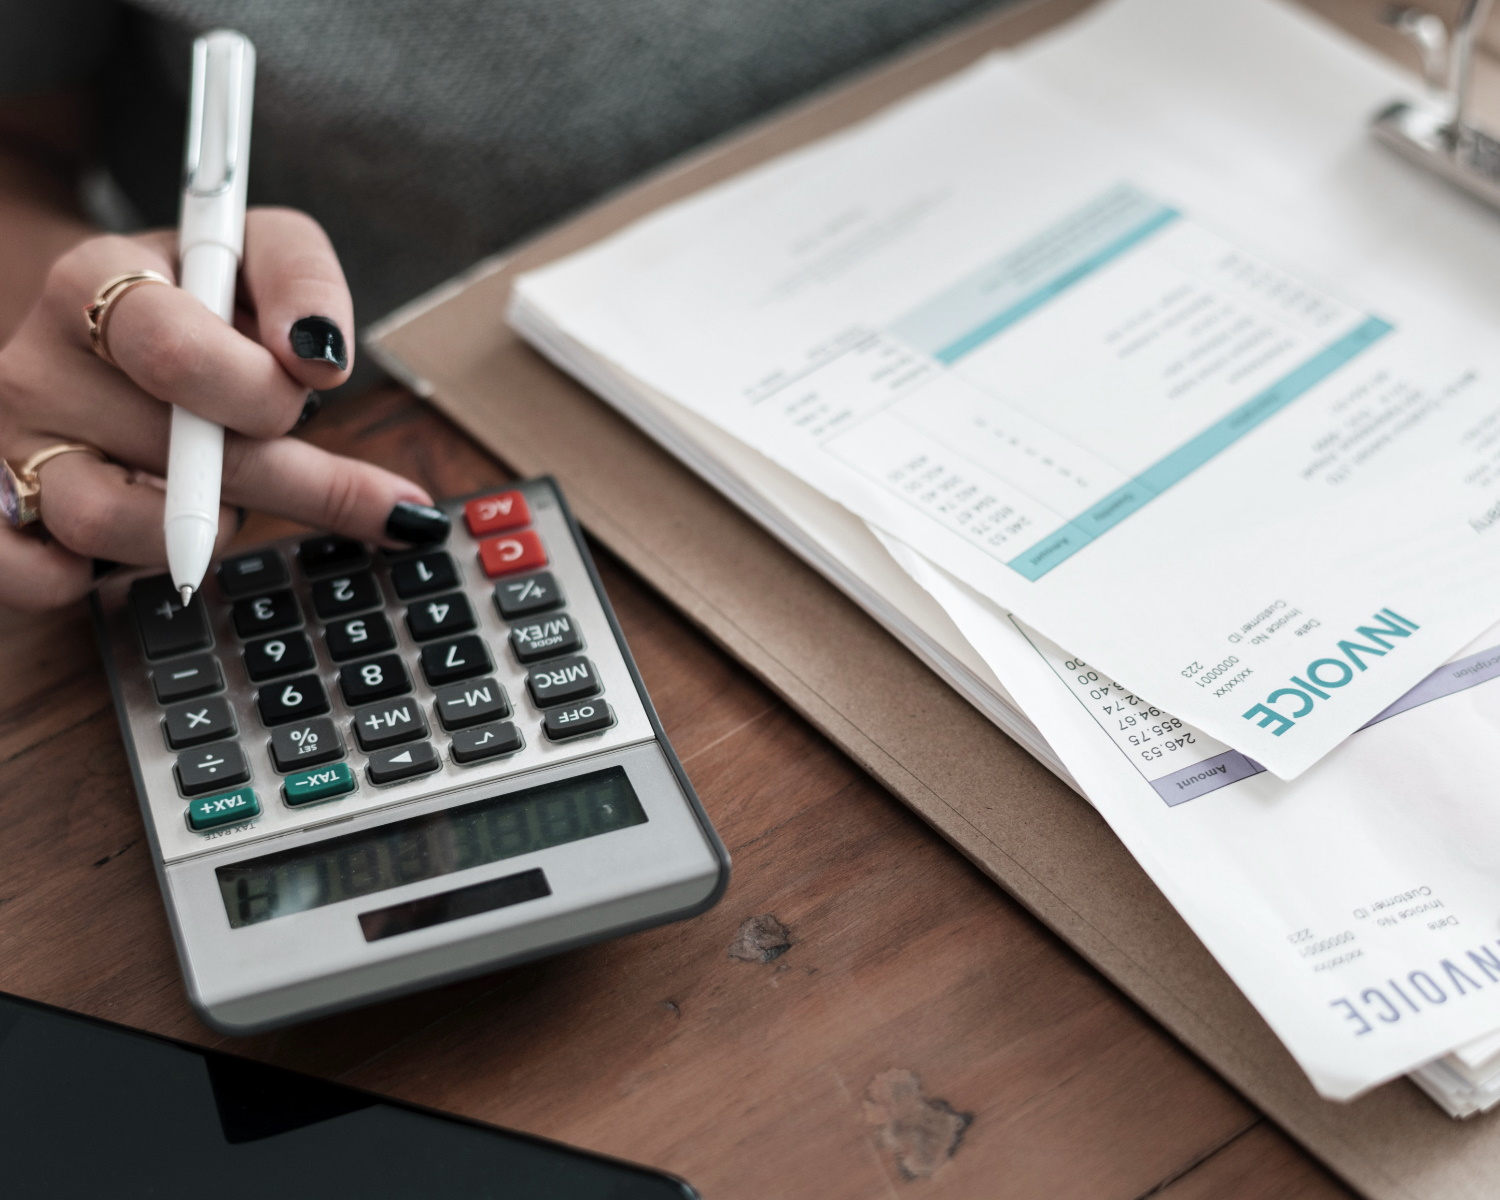 How Can Your Business Grow With Professional Accounting Help?